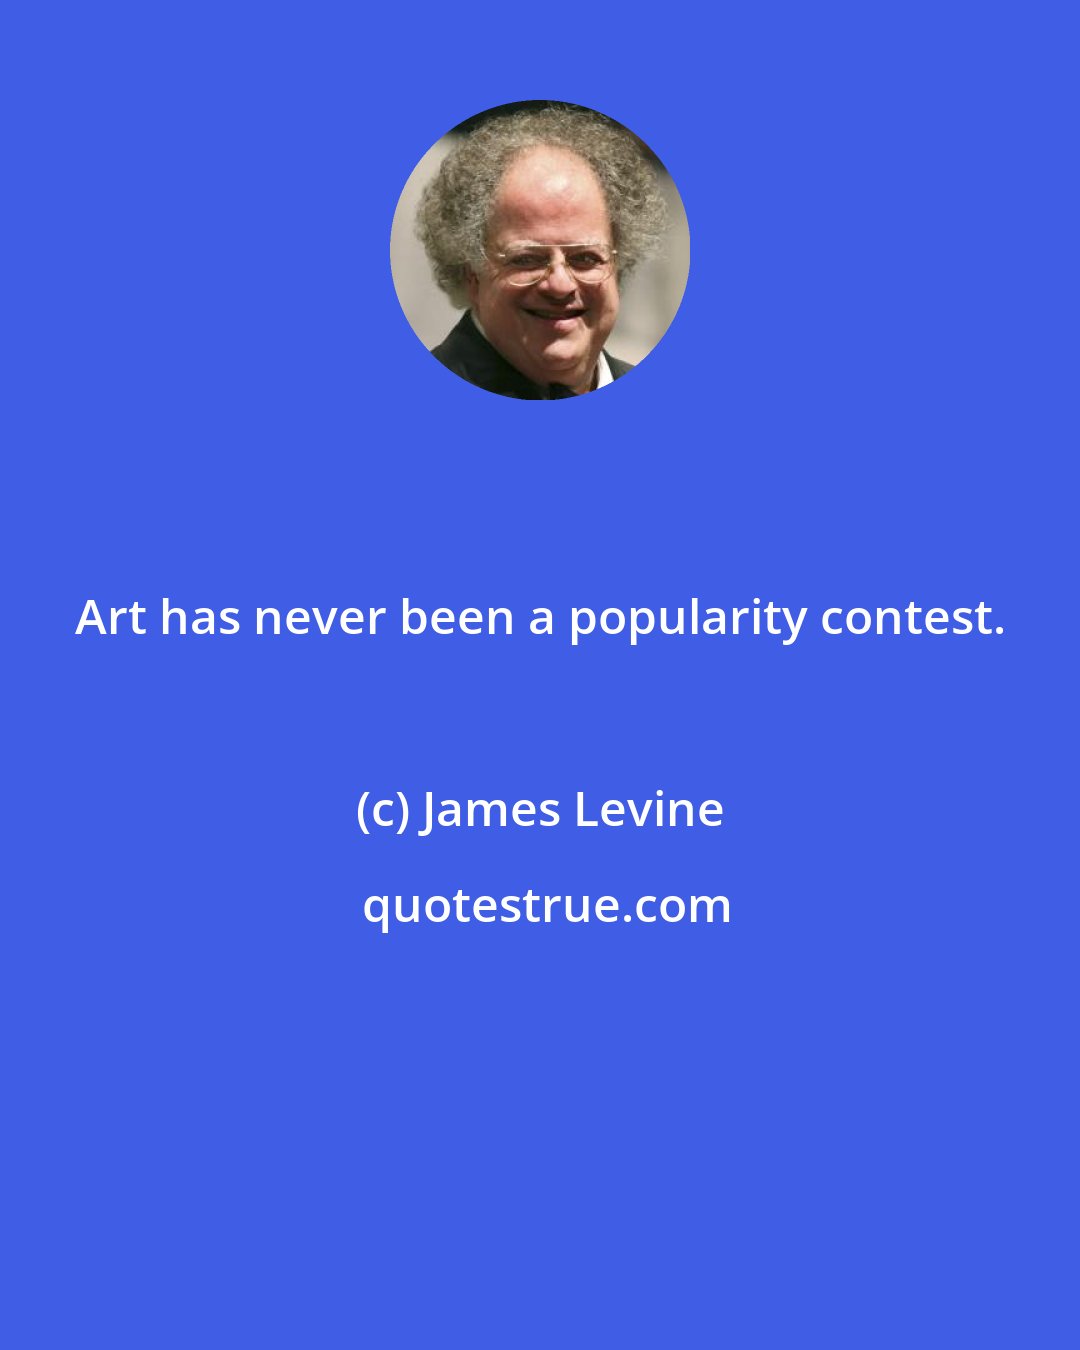 James Levine: Art has never been a popularity contest.